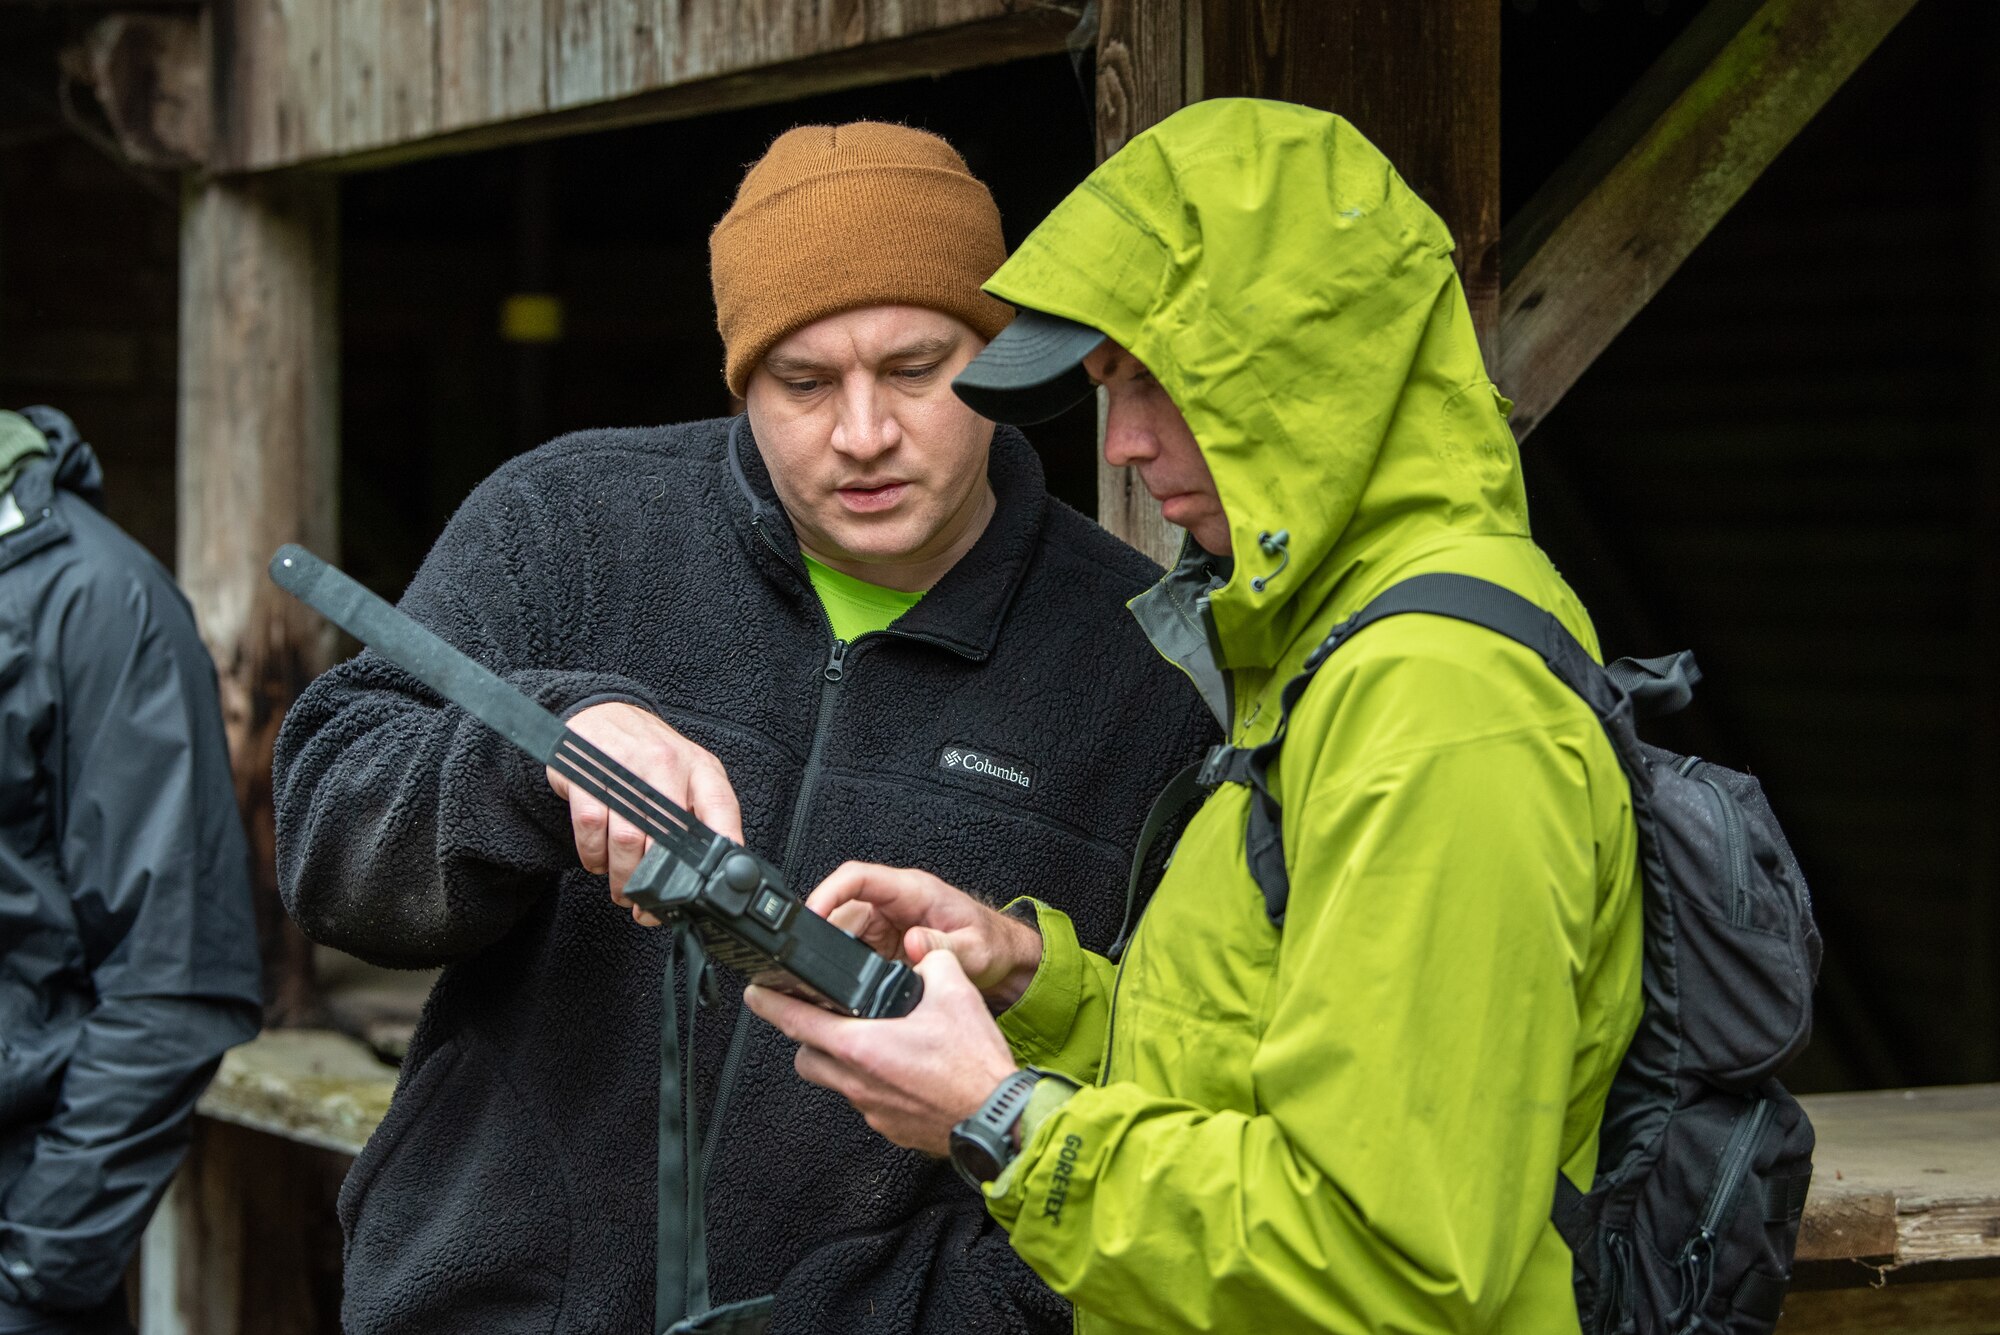 A man in a black fleece jacket and tan beanie points at military walkie talkie while talking to a man holding the walkie talkie while wearing a ball cap, a light green rain jacket with the hood up, and a small black backpack.